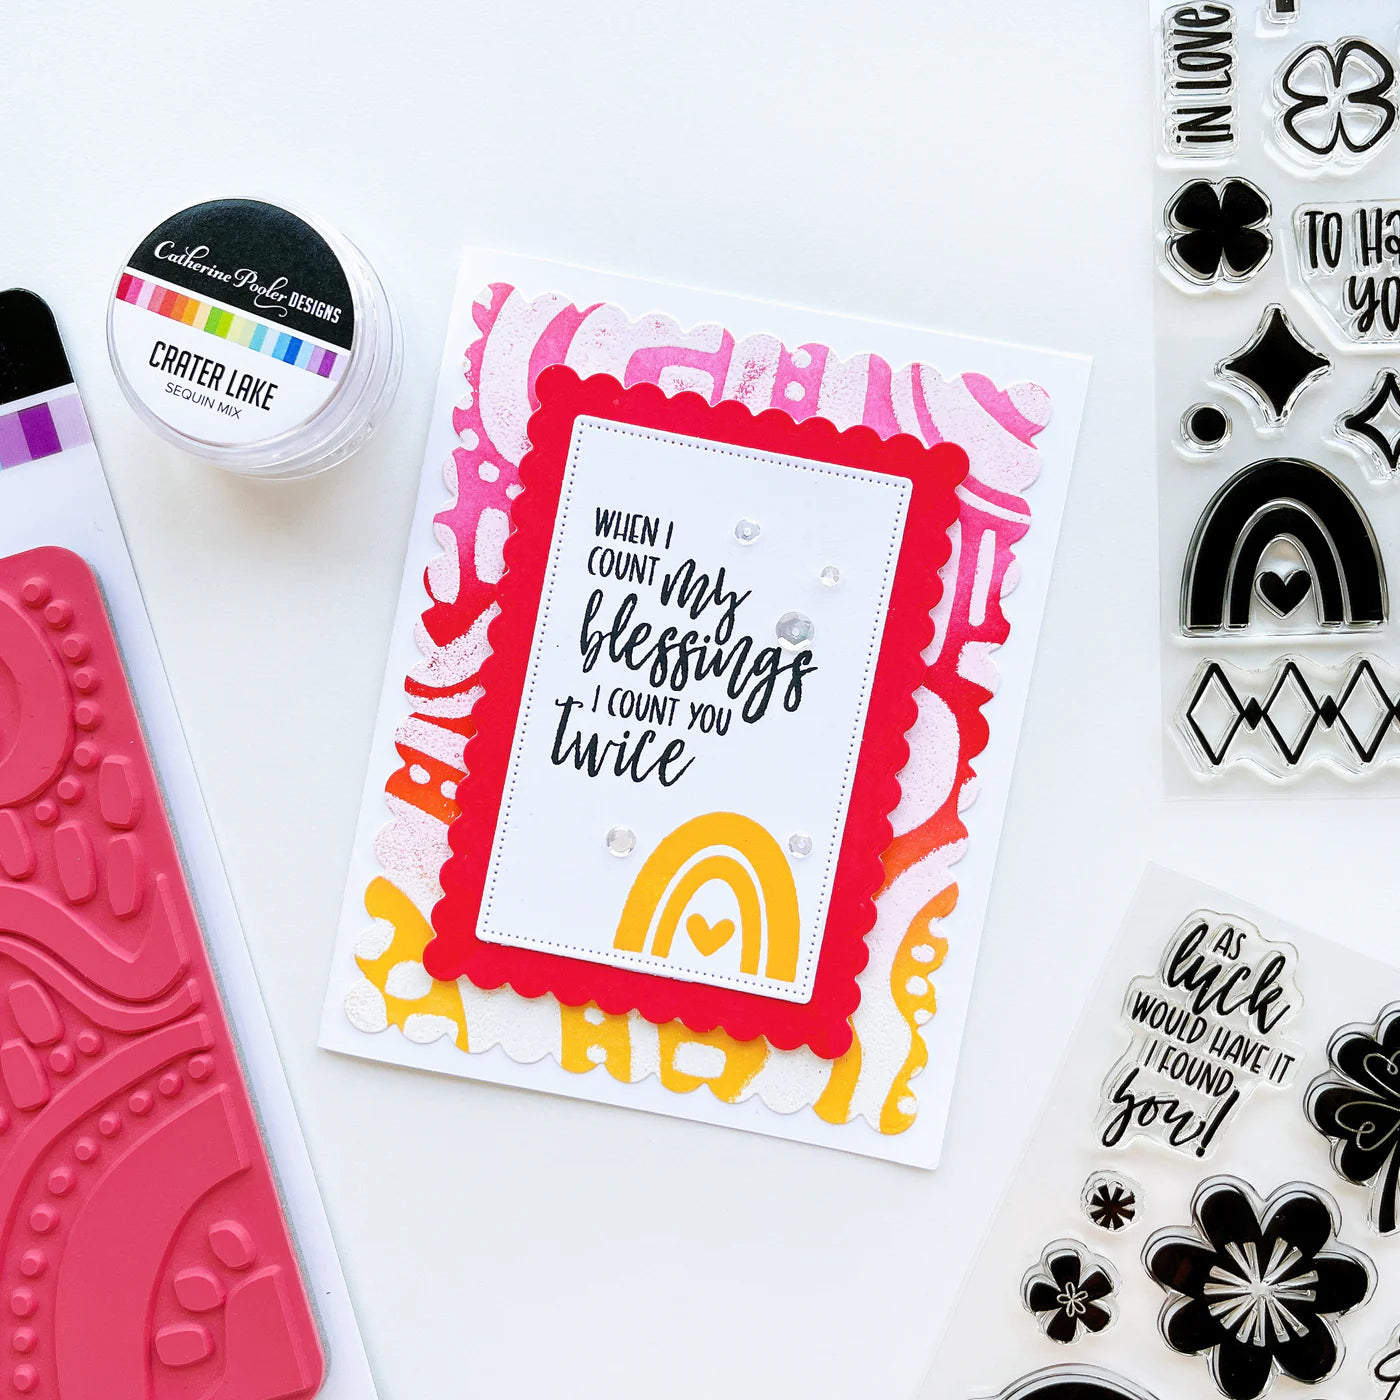 Cha Cha Slide Background Stamp by Catherine Pooler Designs